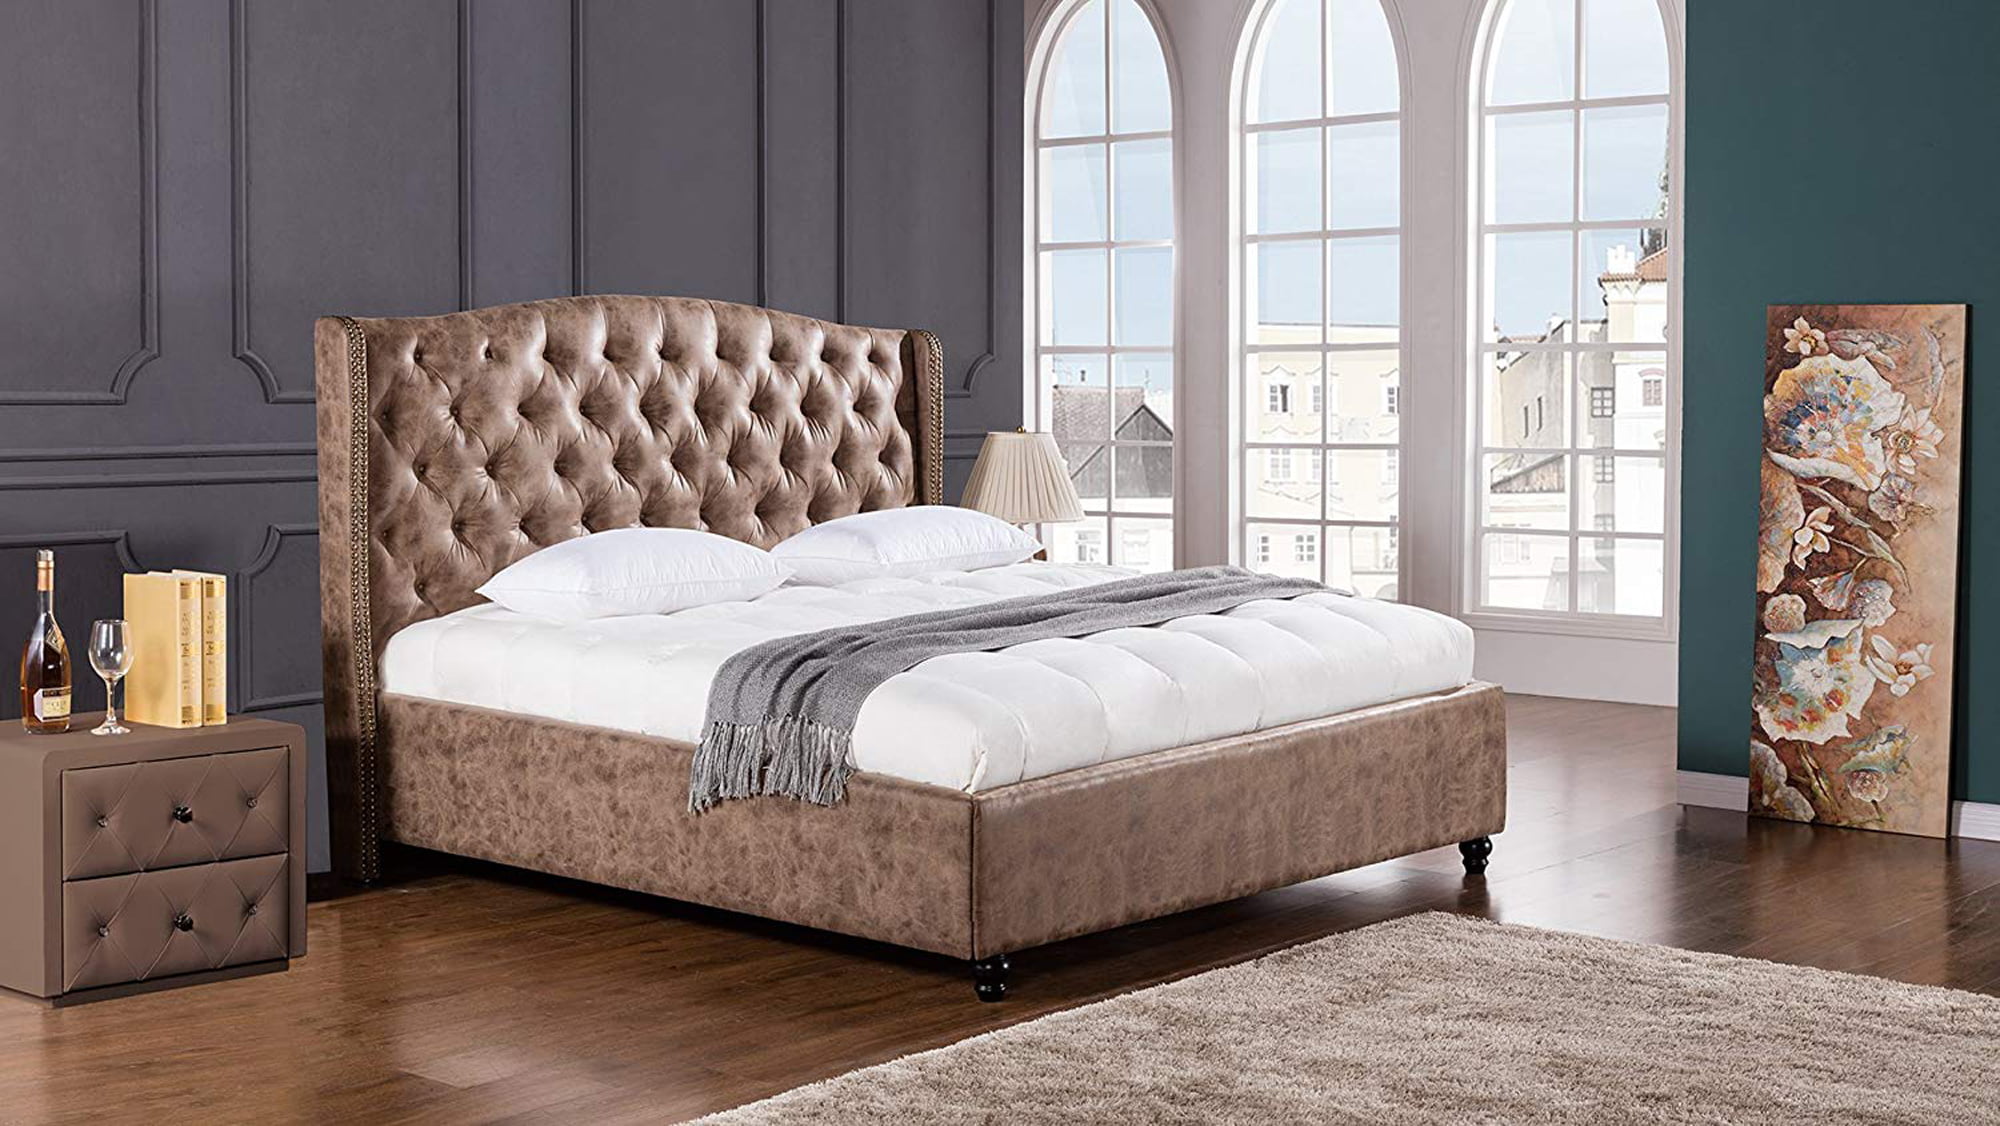 Leatherette Upholstered Wooden California King Size Bed with Tufted